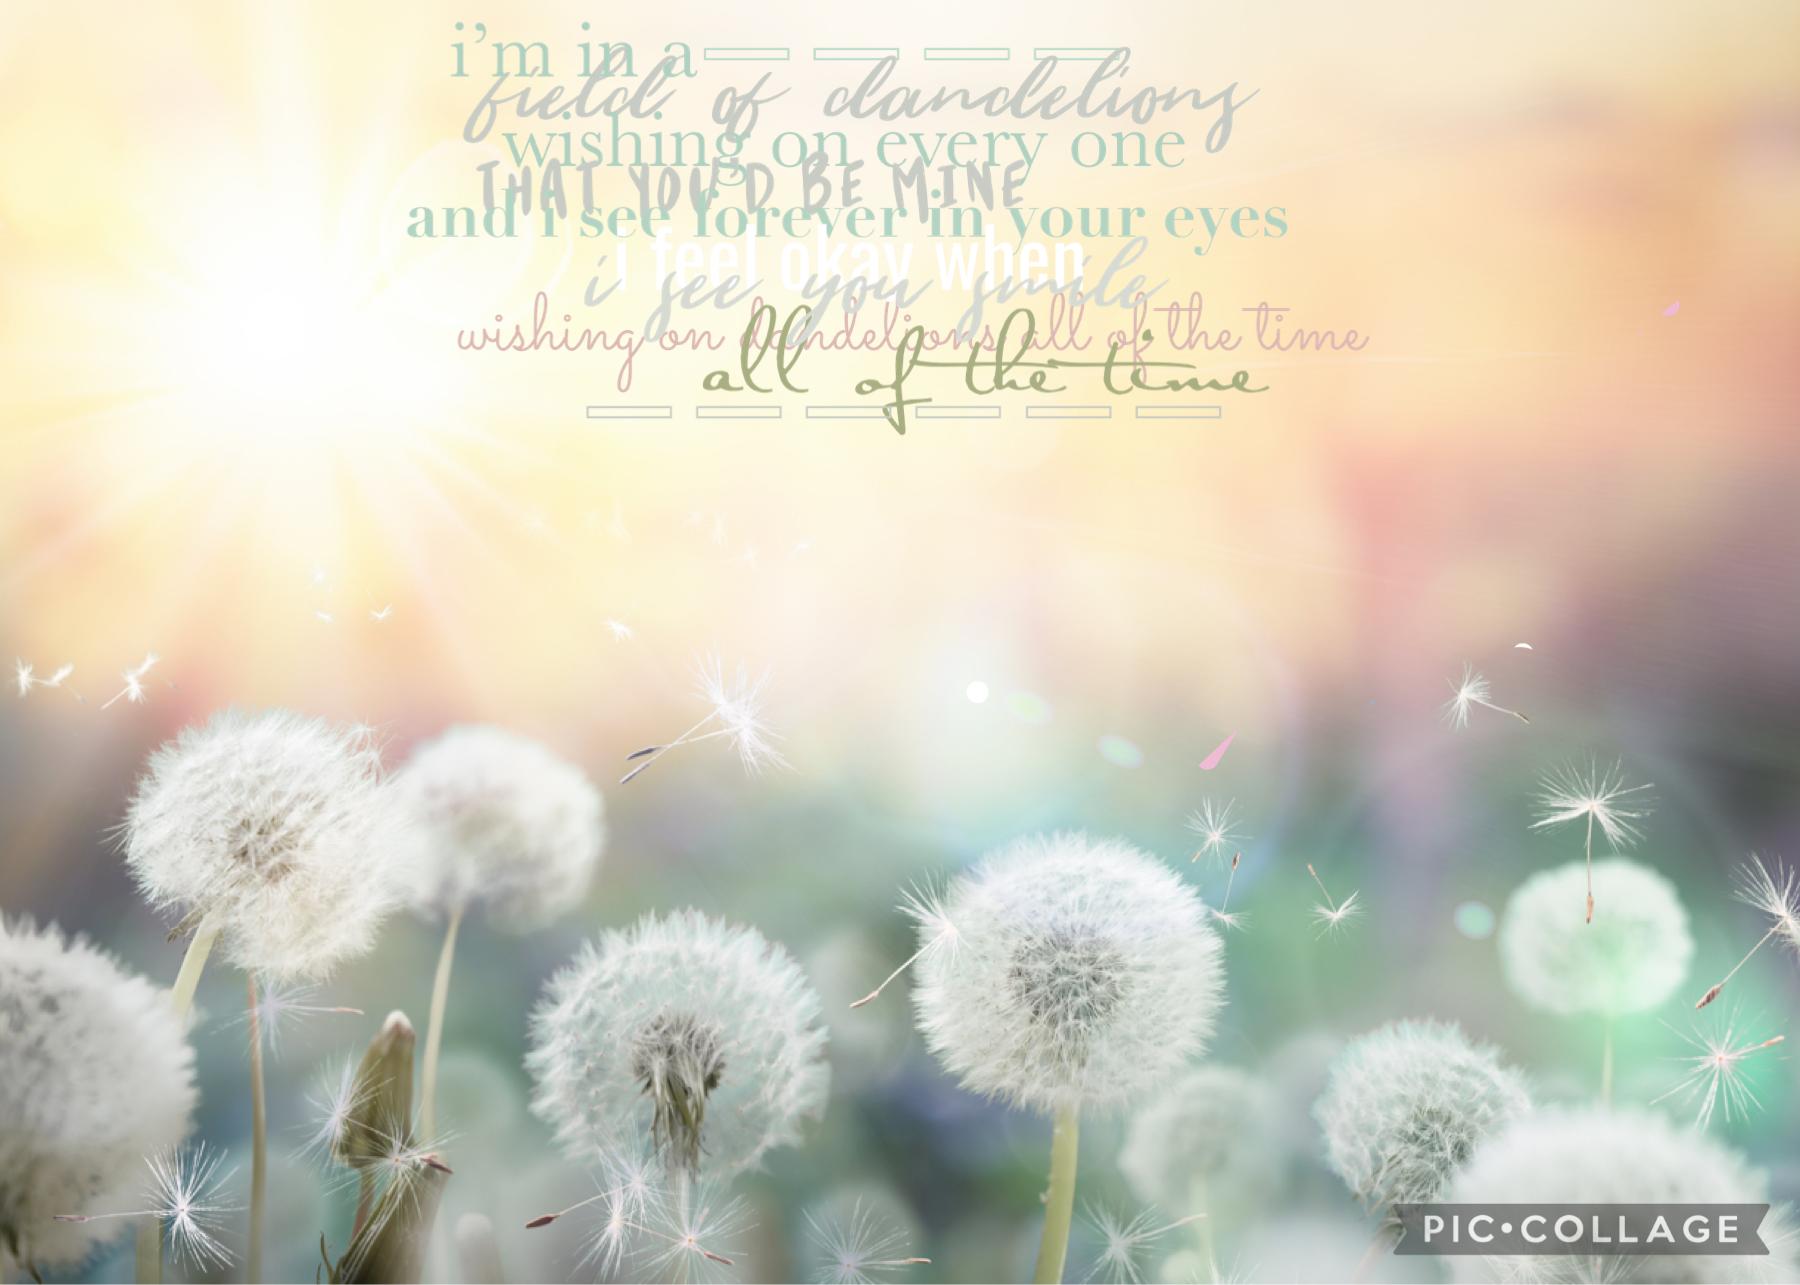 tap (3/22/2022) ELLA THIS IS FOR YOUUU
hey guys how are you today? i fell in LOVE with this bg and HAD to use it, sorry i haven’t been on a steady theme lately lol. 
sotd: dandelions by ruth b (duhhh) 